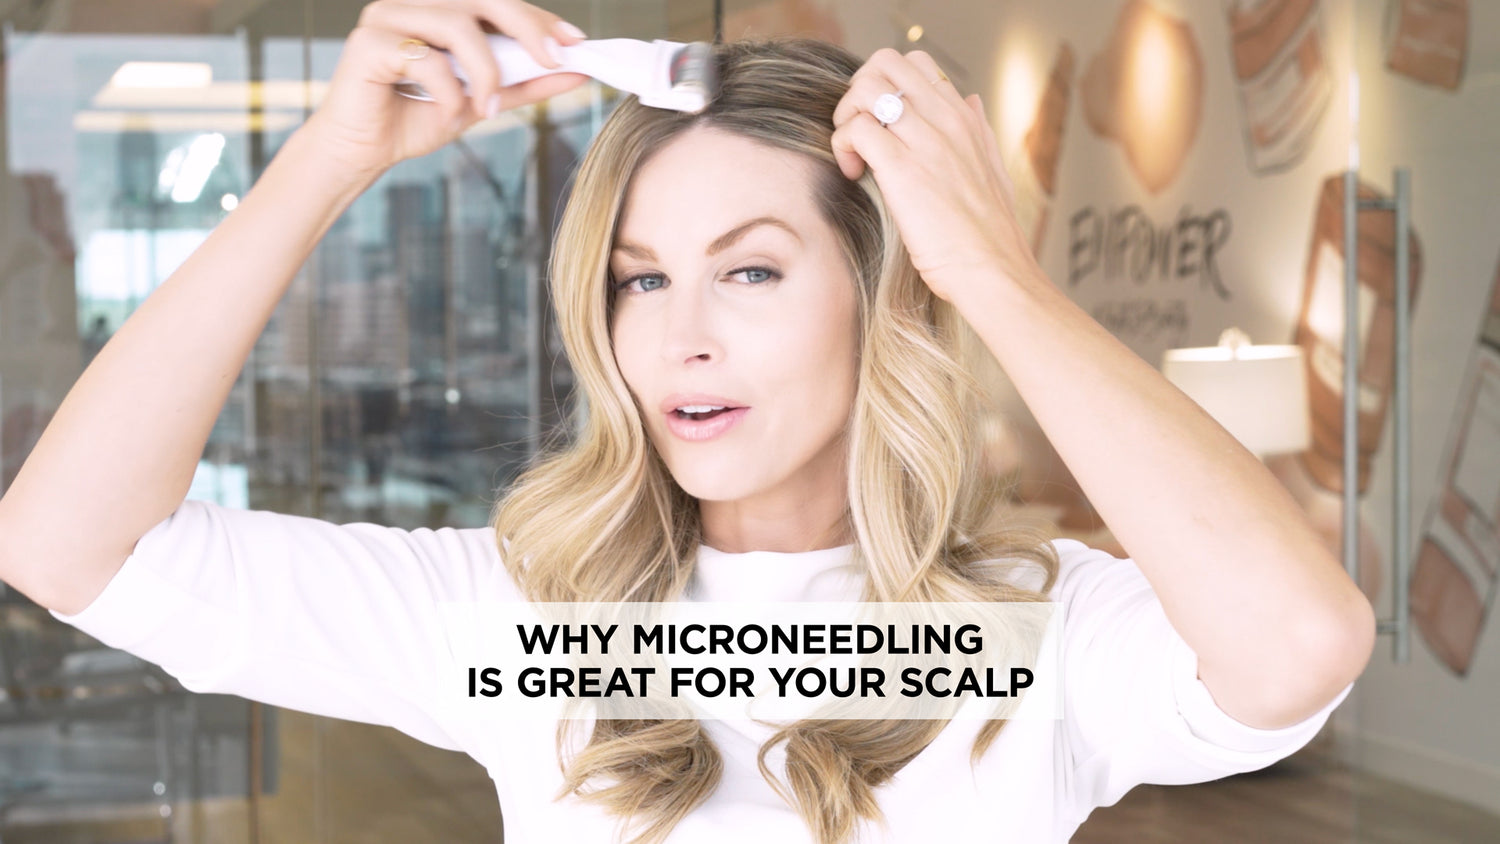 BeautyBio: Why Microneedling Is Great For Your Scalp